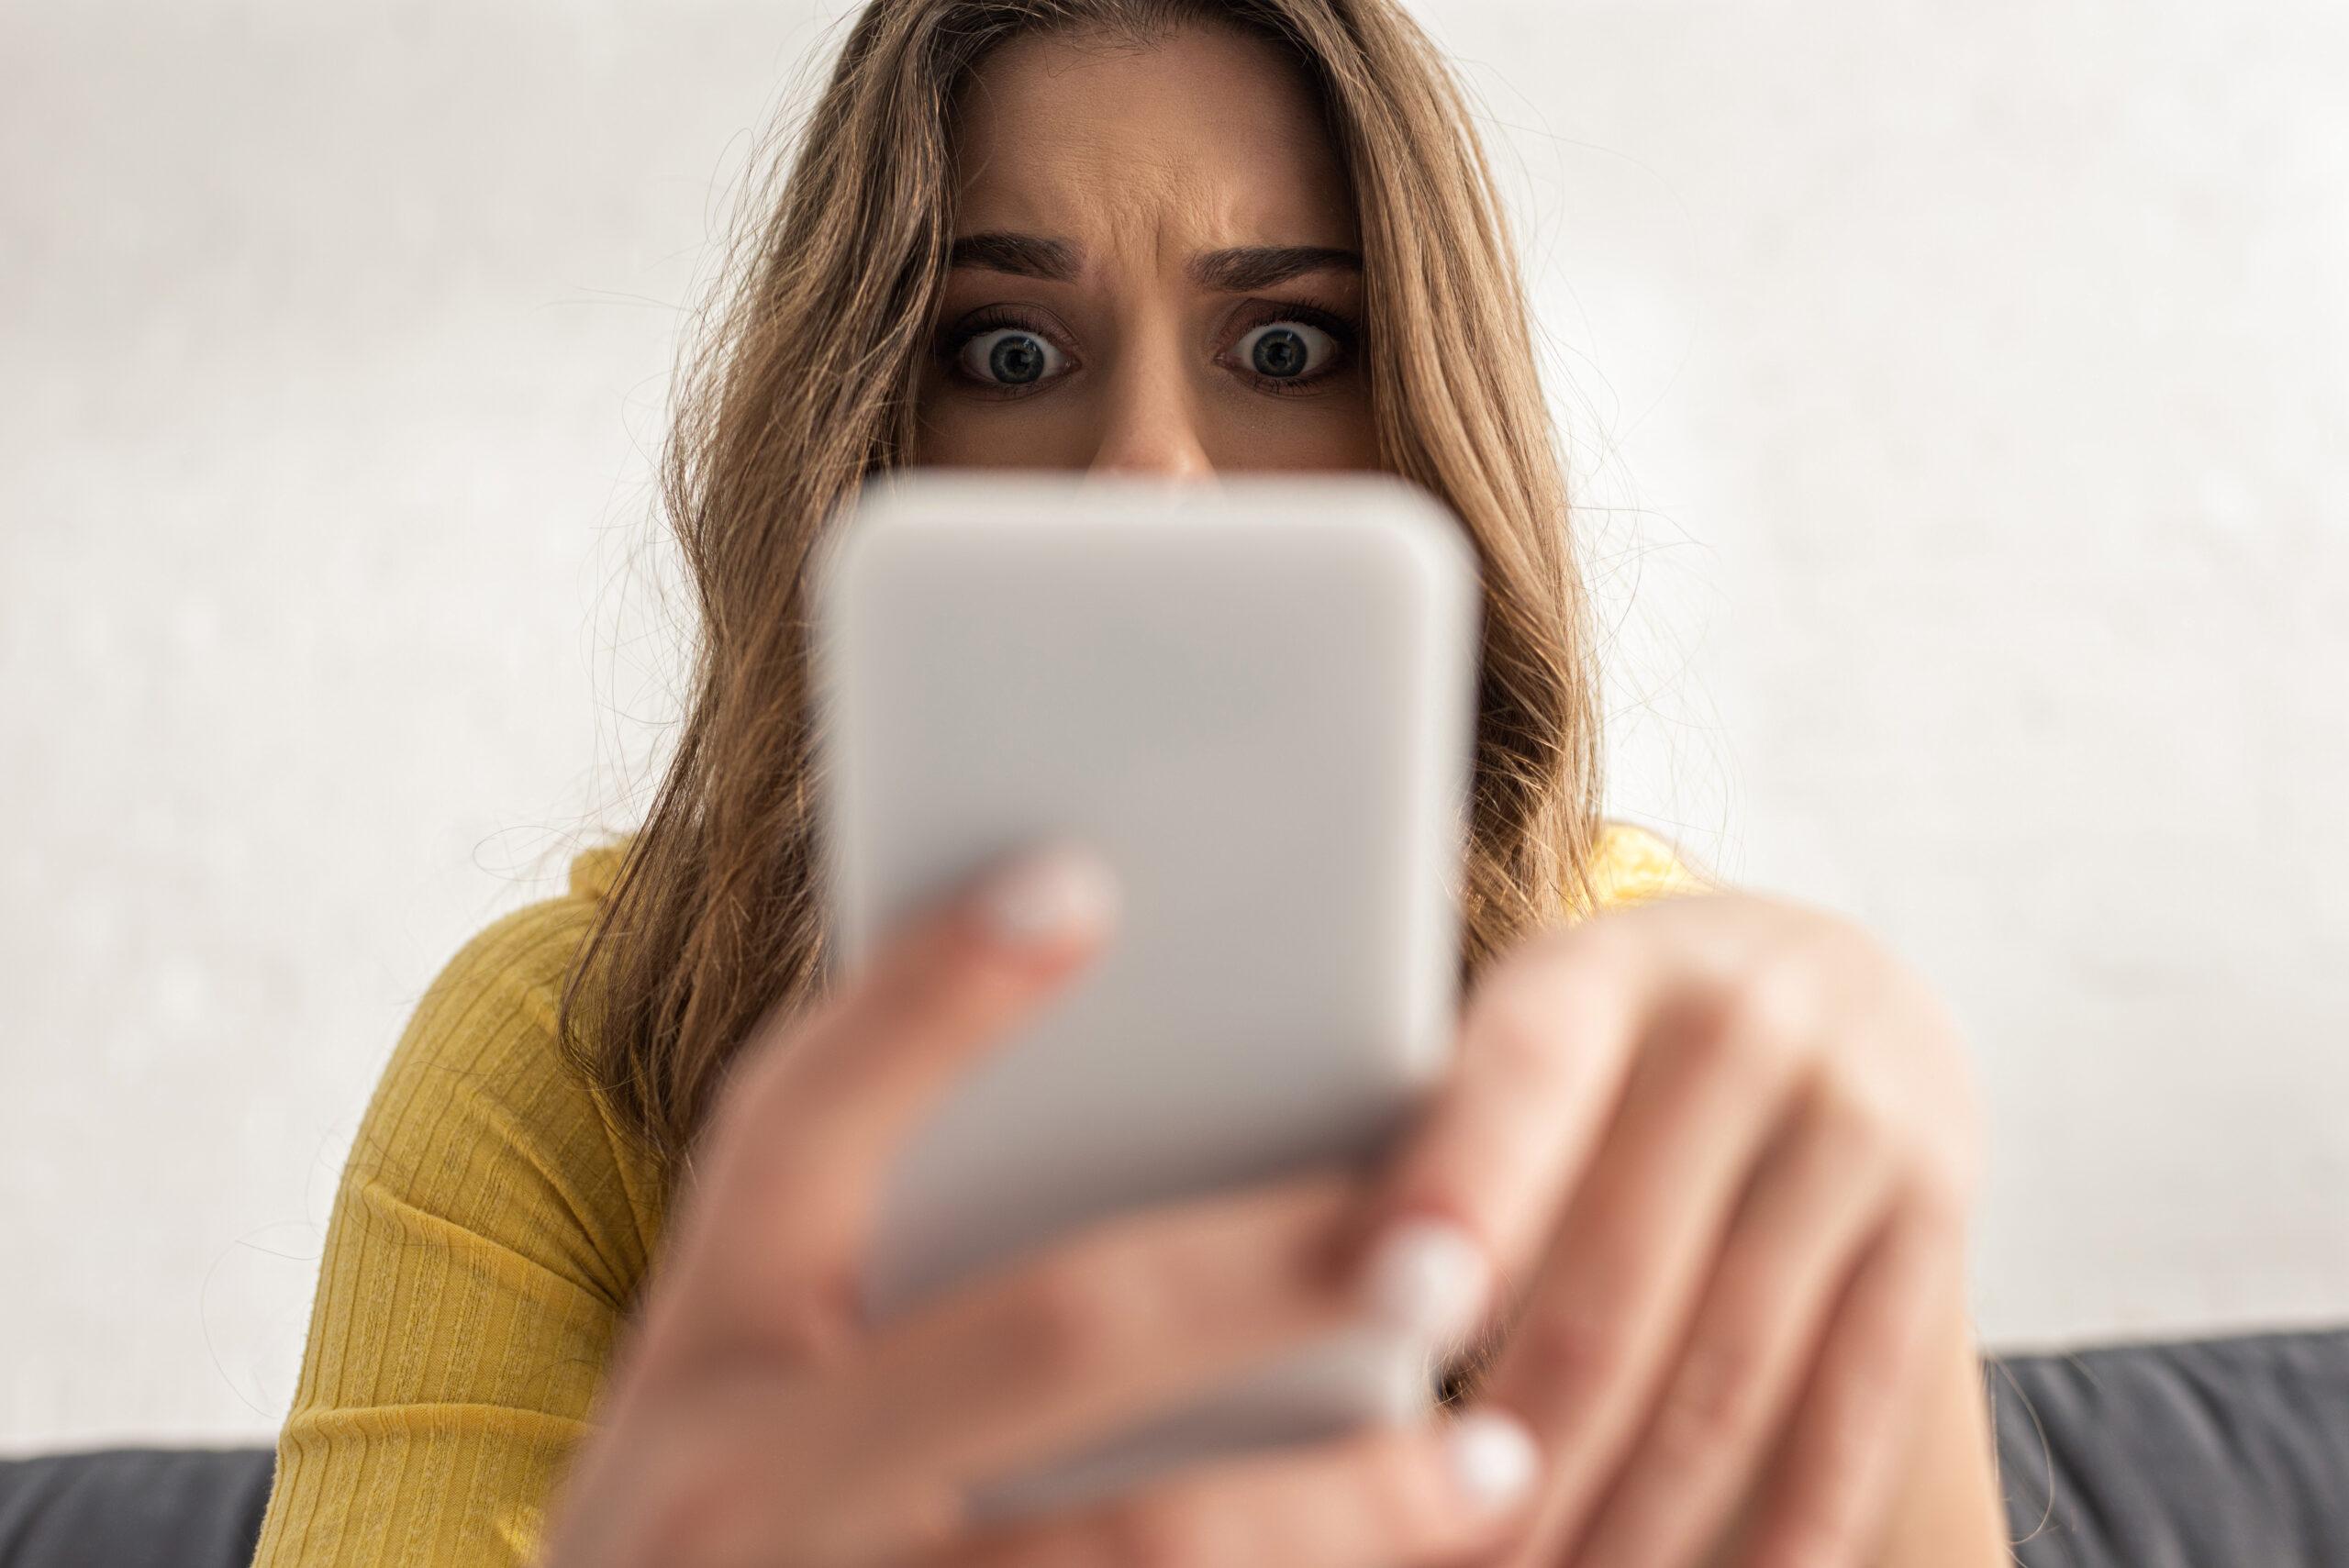 Shocked face of a woman half-covered by the smart phone she is using